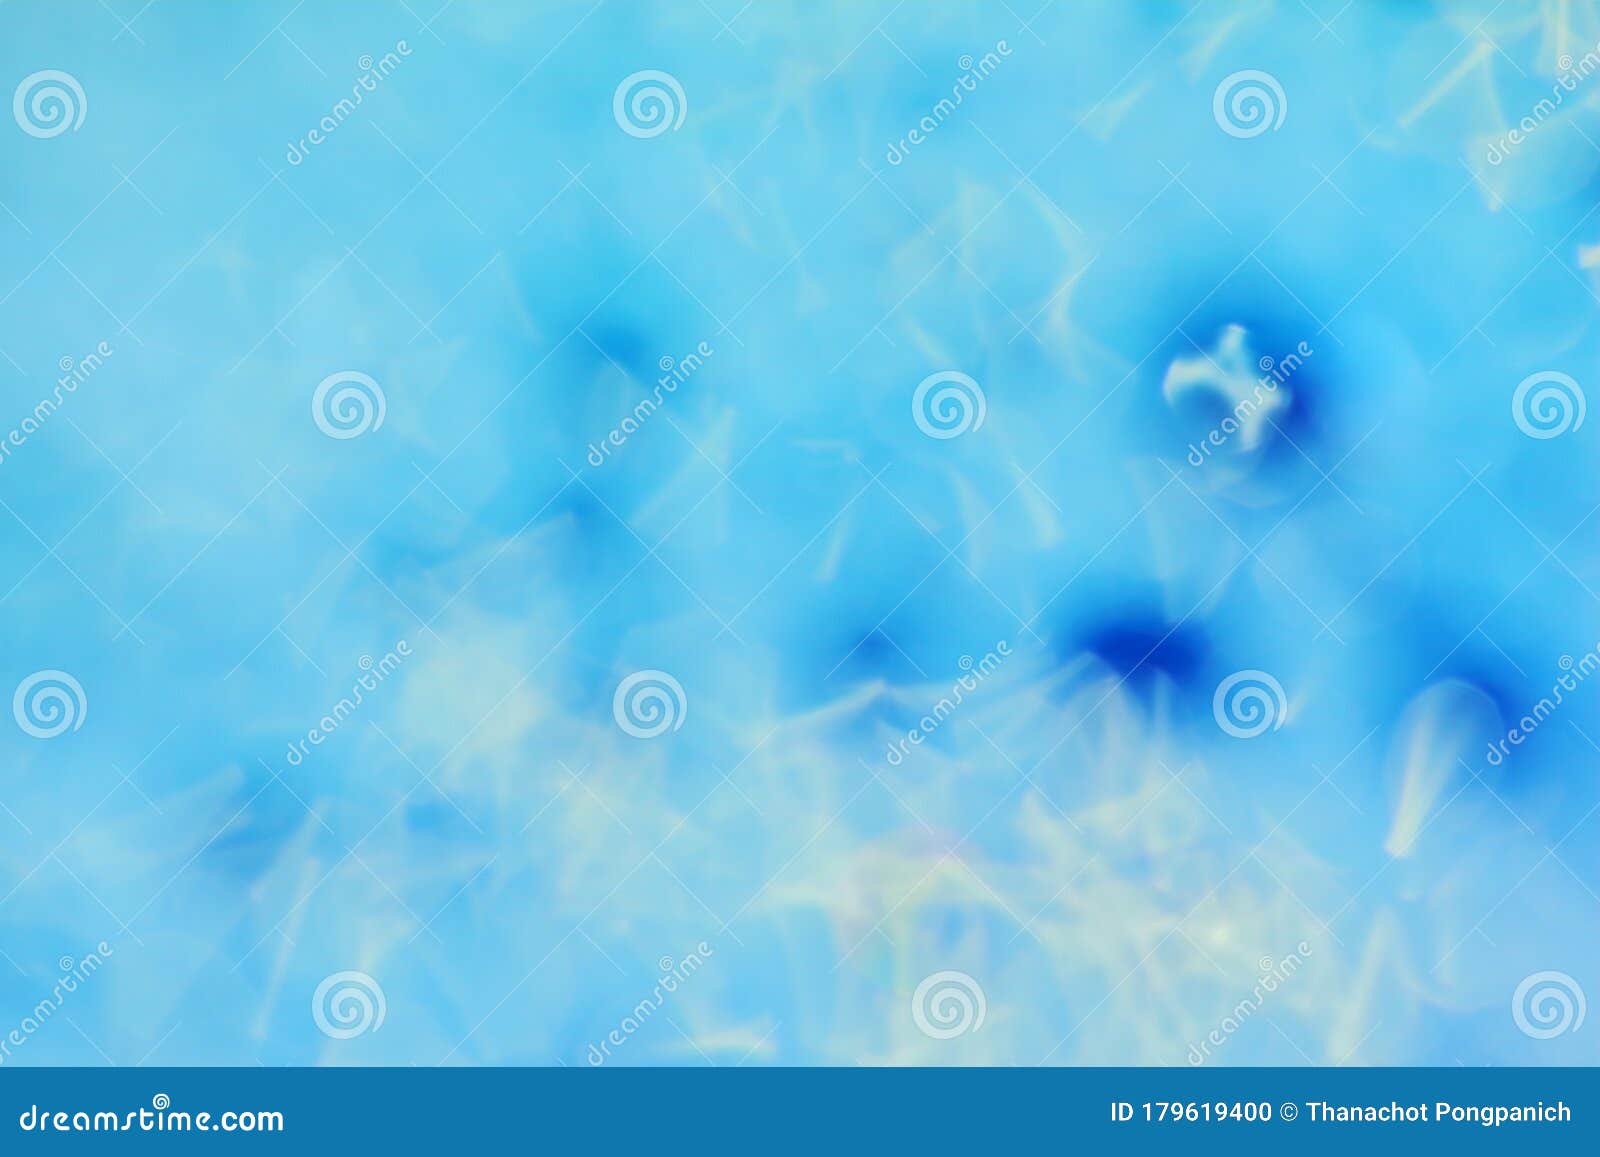 Beautiful Bokeh Coler in Close Up for Background Stock Photo - Image of ...